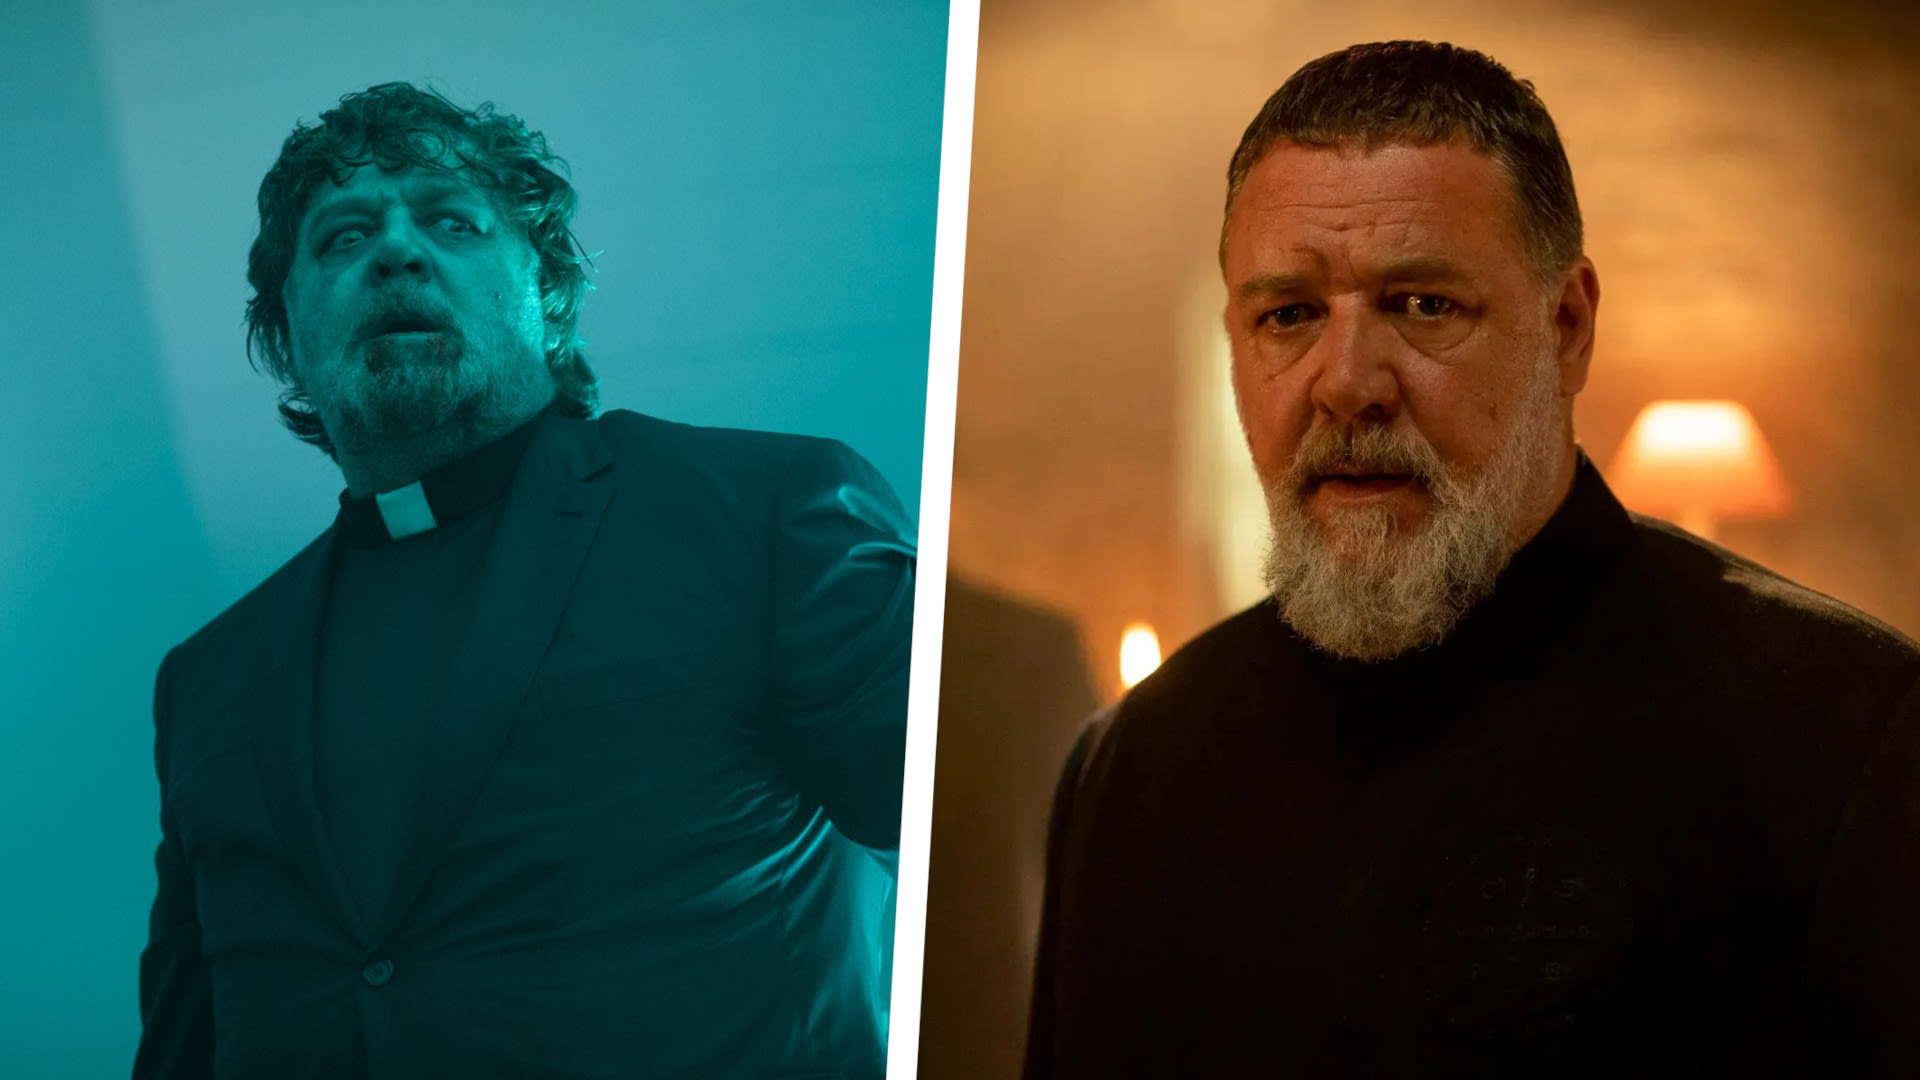 Russell Crowe's two exorcism films actually couldn't be more different